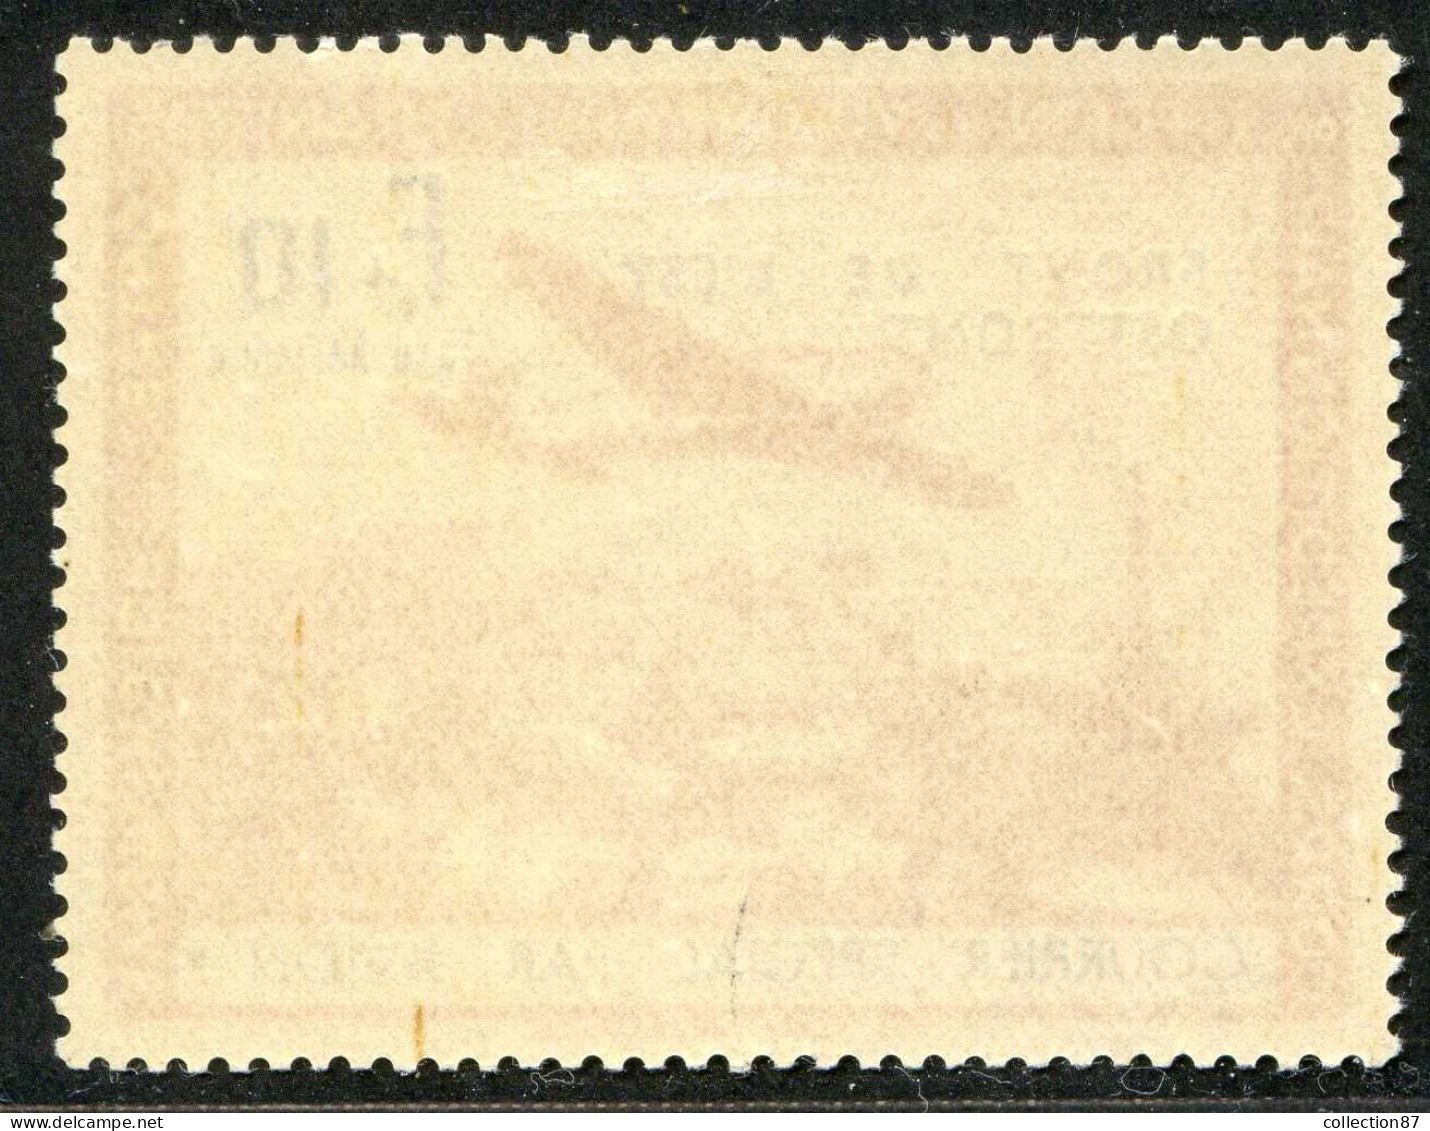 REF093 > FRANCE LVF < Yv N° 5 * Neuf Dos Visible - MH * - Aviation Avion Bombardier - Guerre (timbres De)